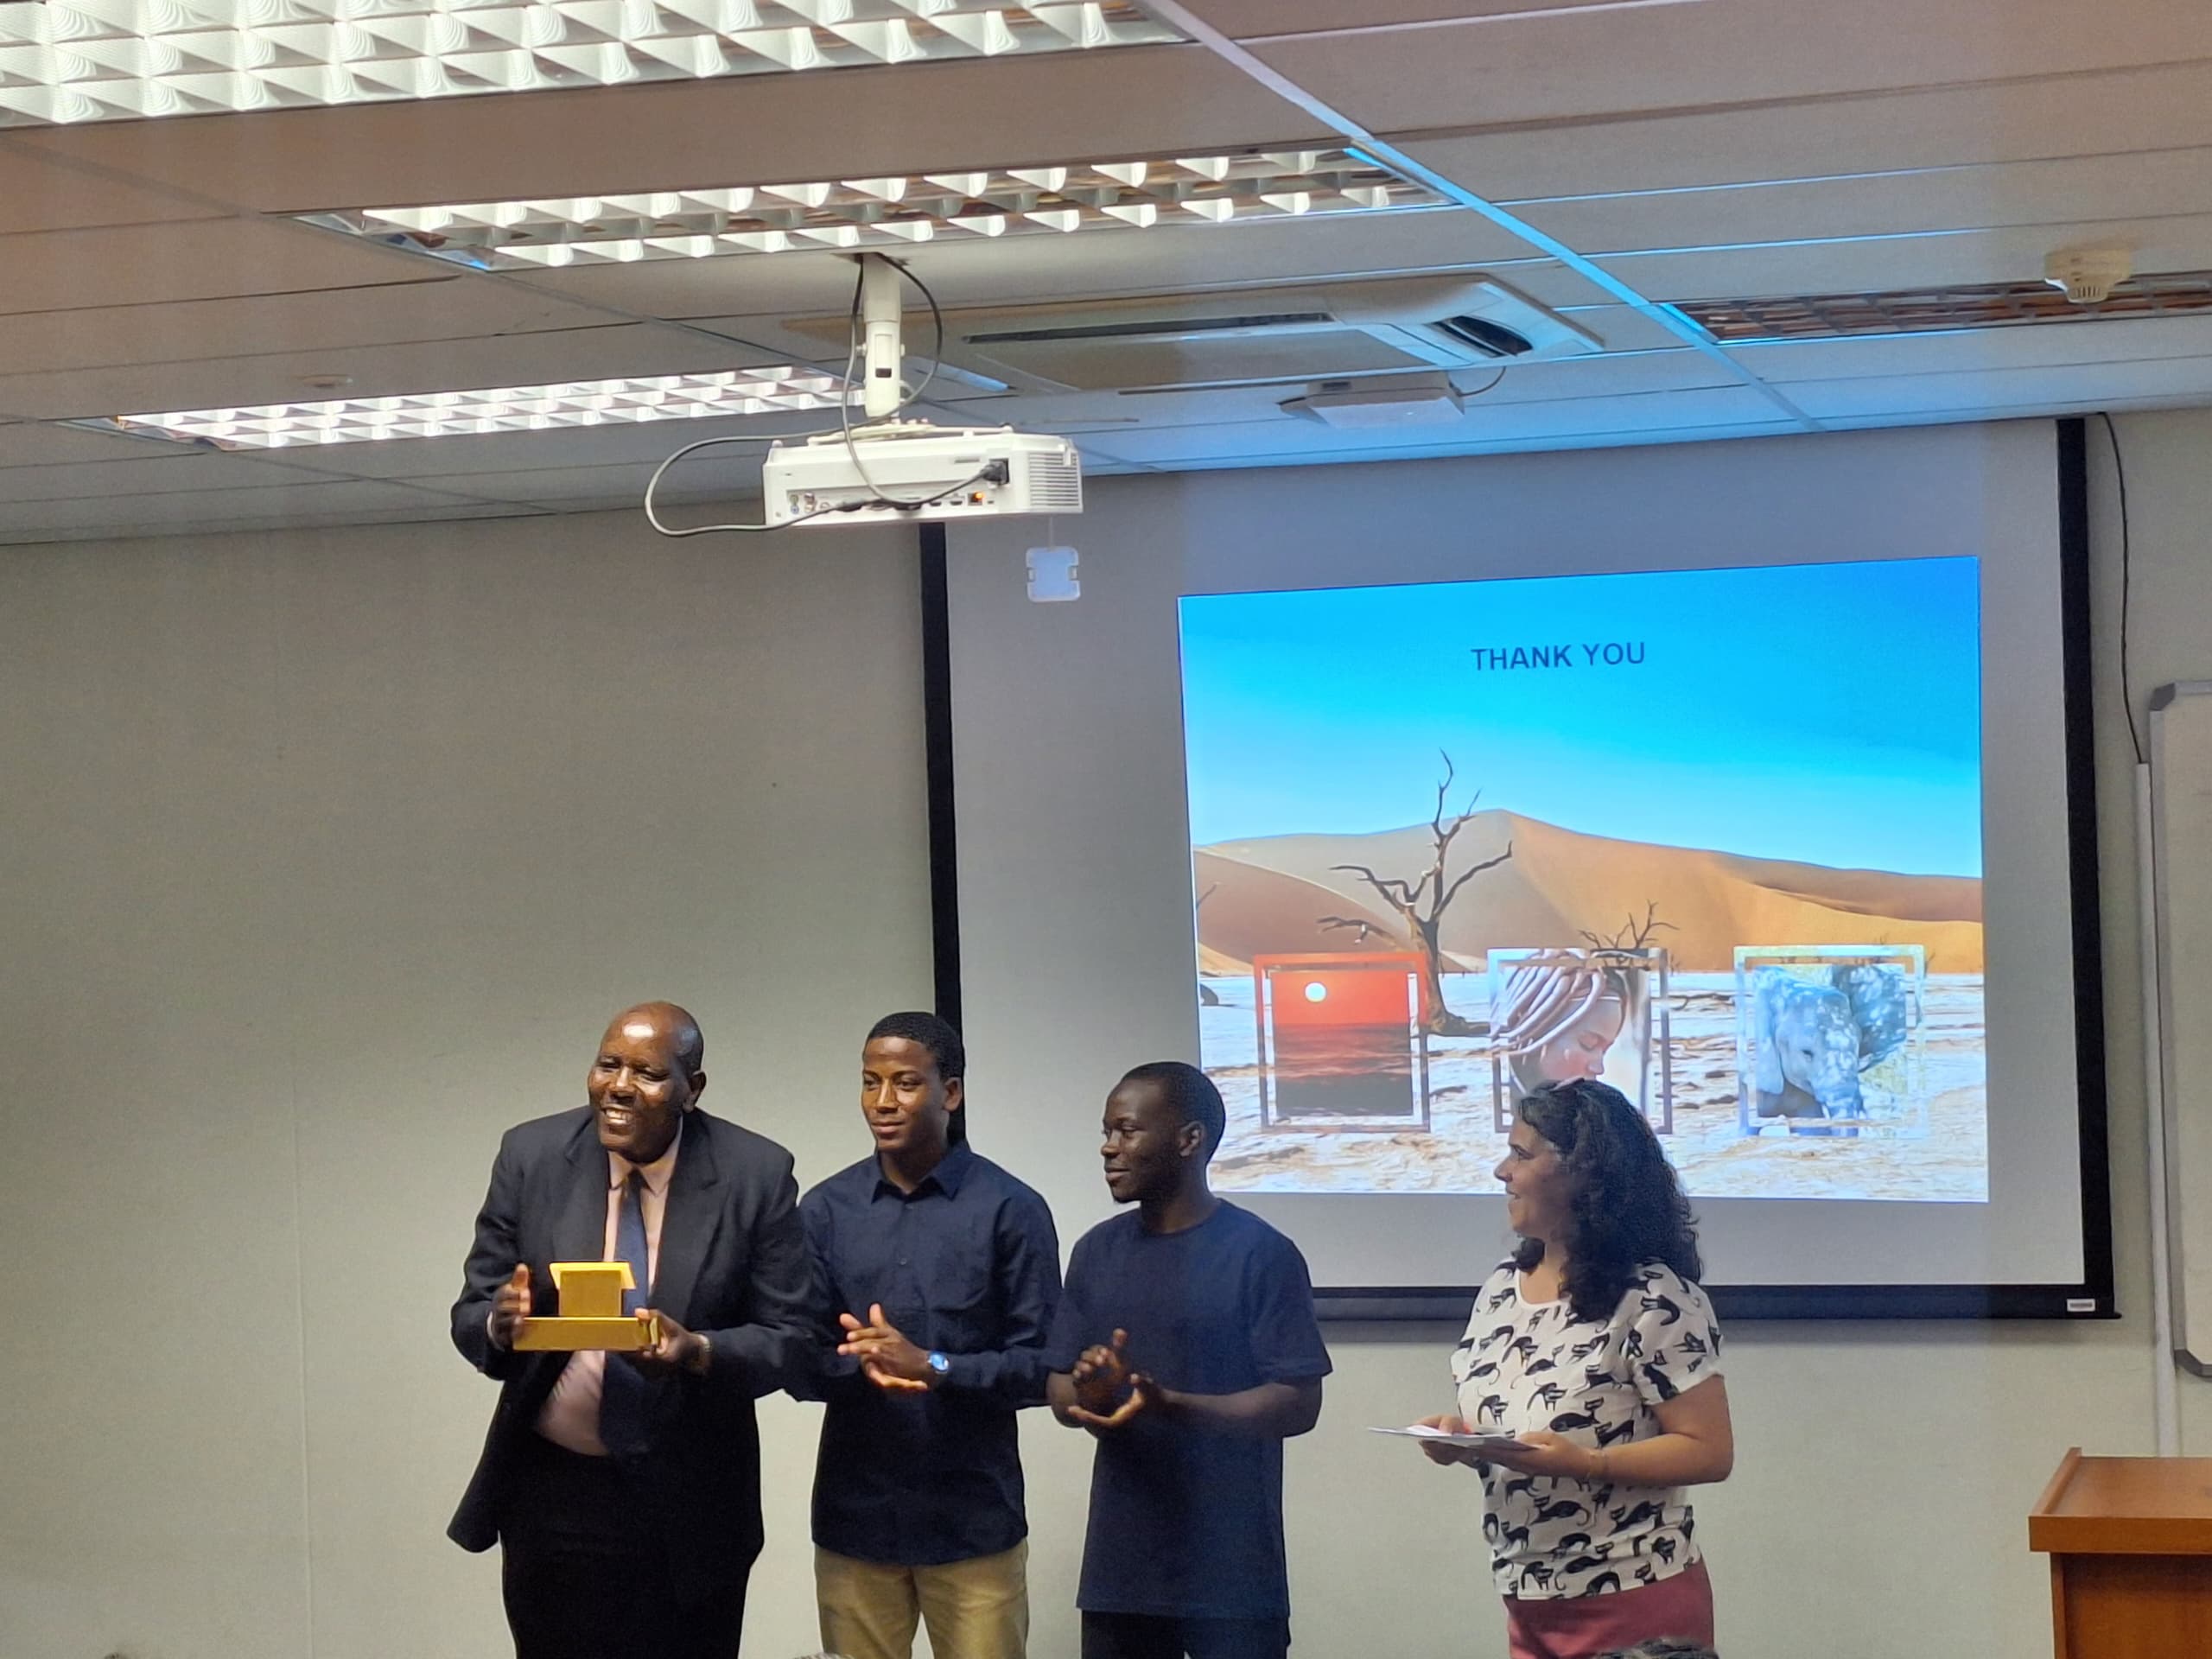 Professor  Andrew Niikondo, Deputy Vice Chancellor Teaching and Technology  receiving a gift  from the students from the National Institute of Petroleum, Kwanza Sul , Angola  while Ms Sandra Rocha, Engineer for Geology of Petroleum is looking on.